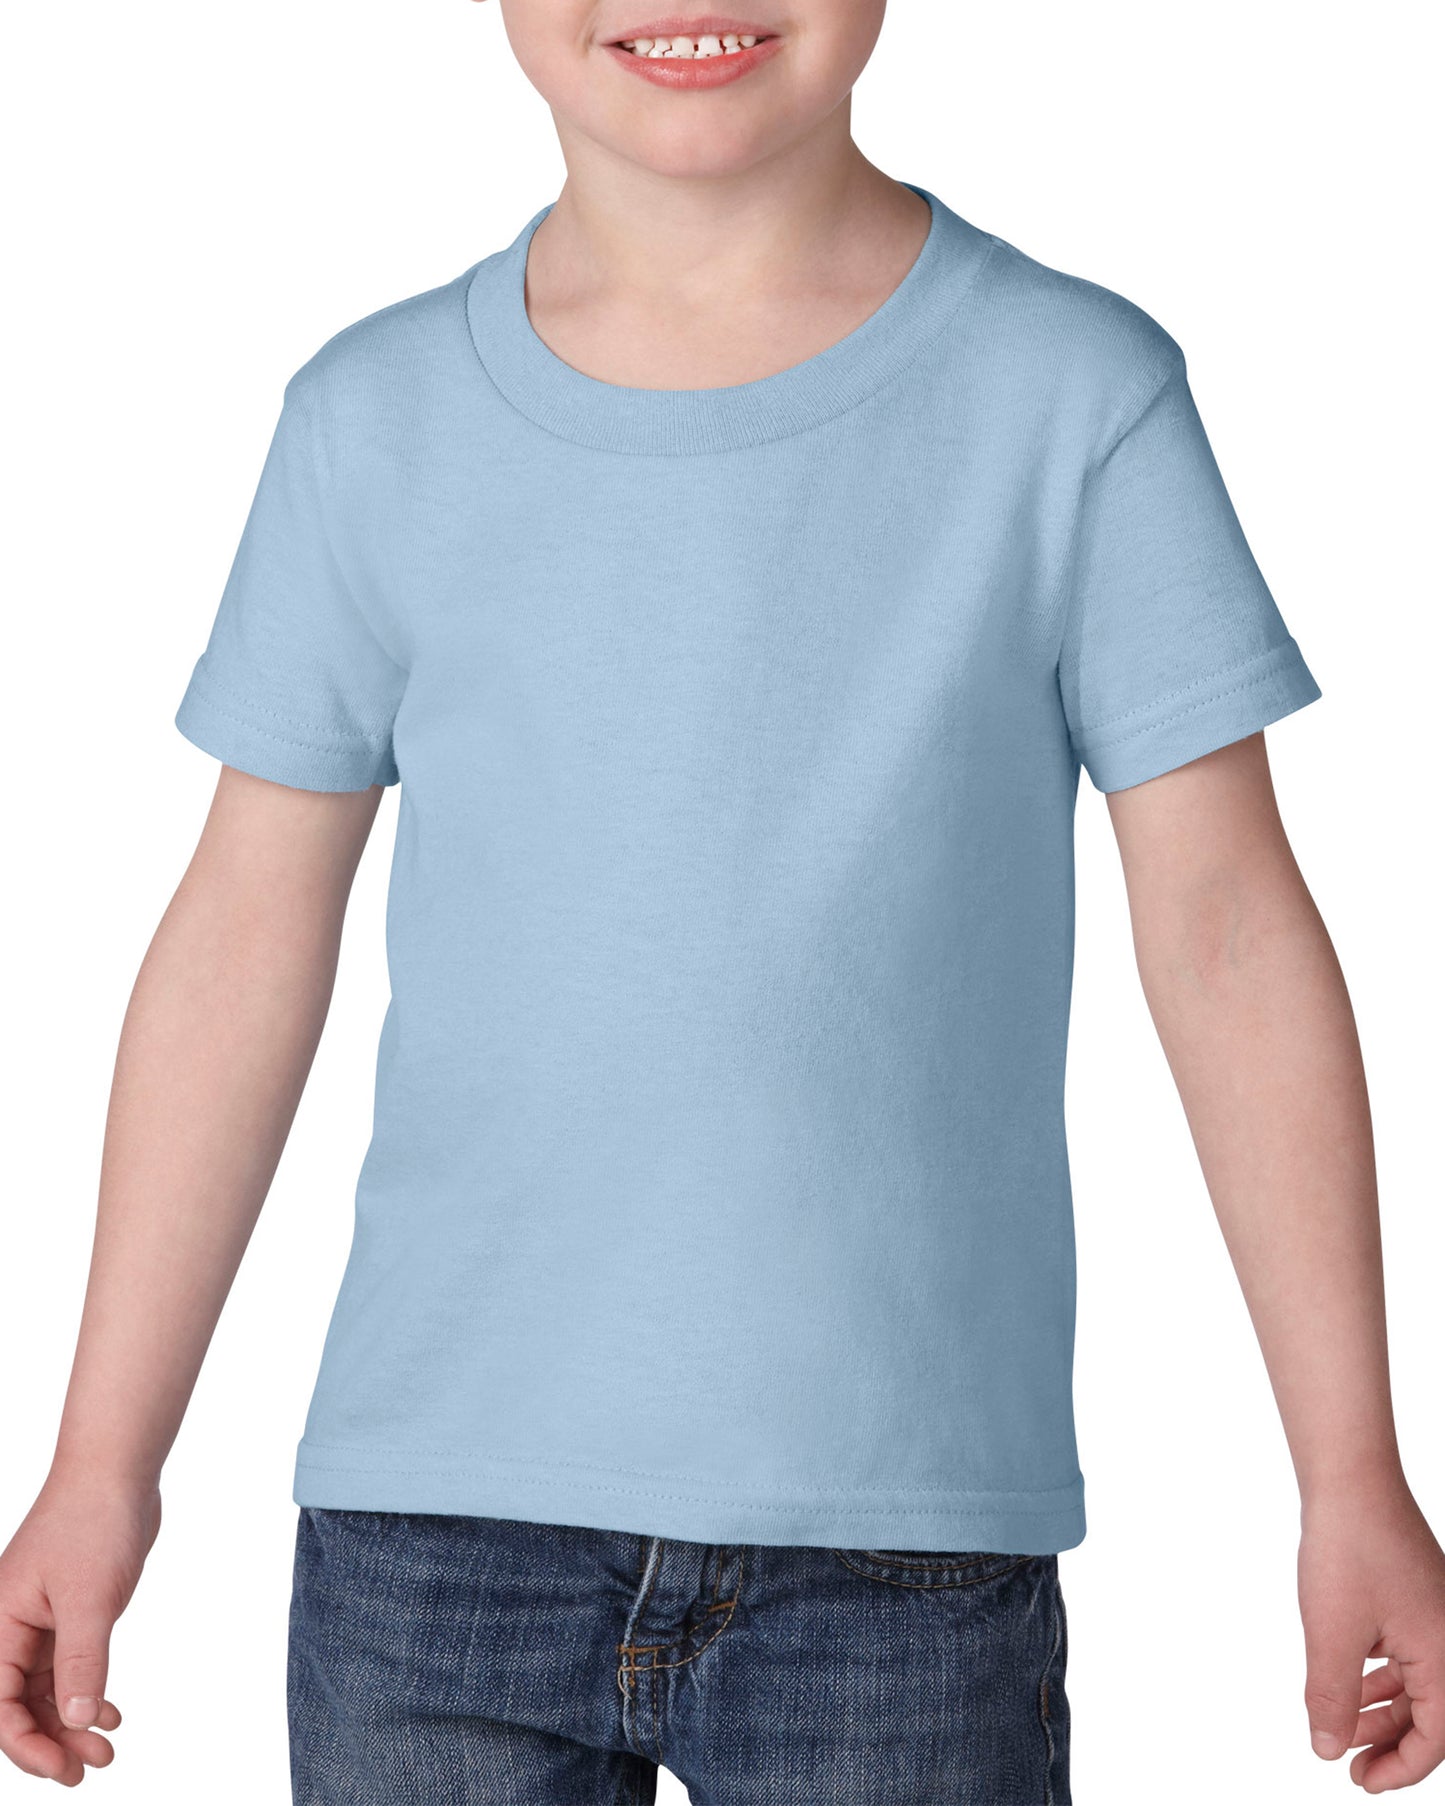 Toddler Heavy Cotton Tees